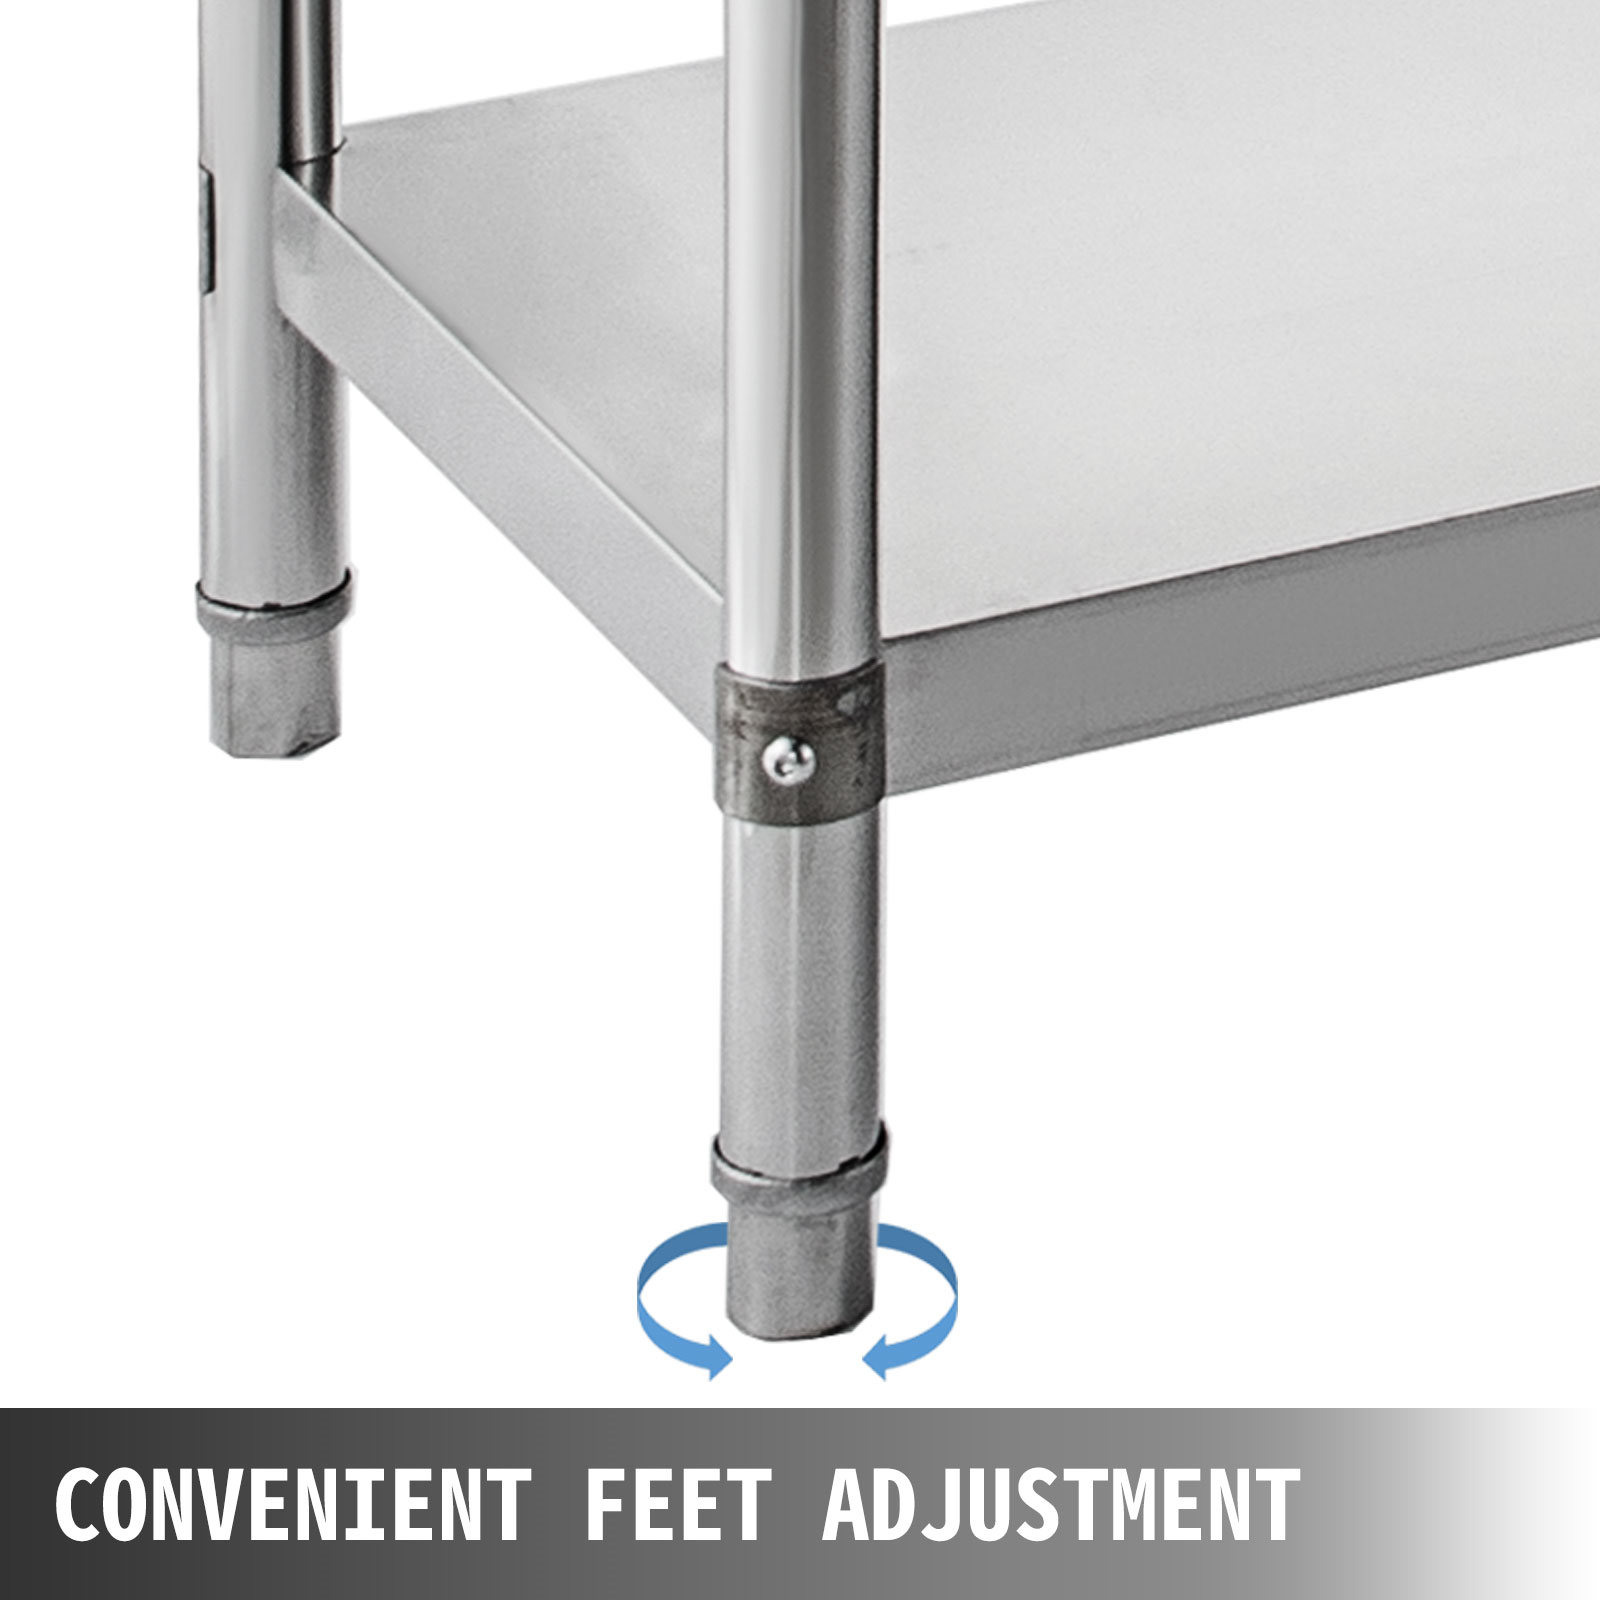 shelving unit, stainless steel, 4/5 tiers